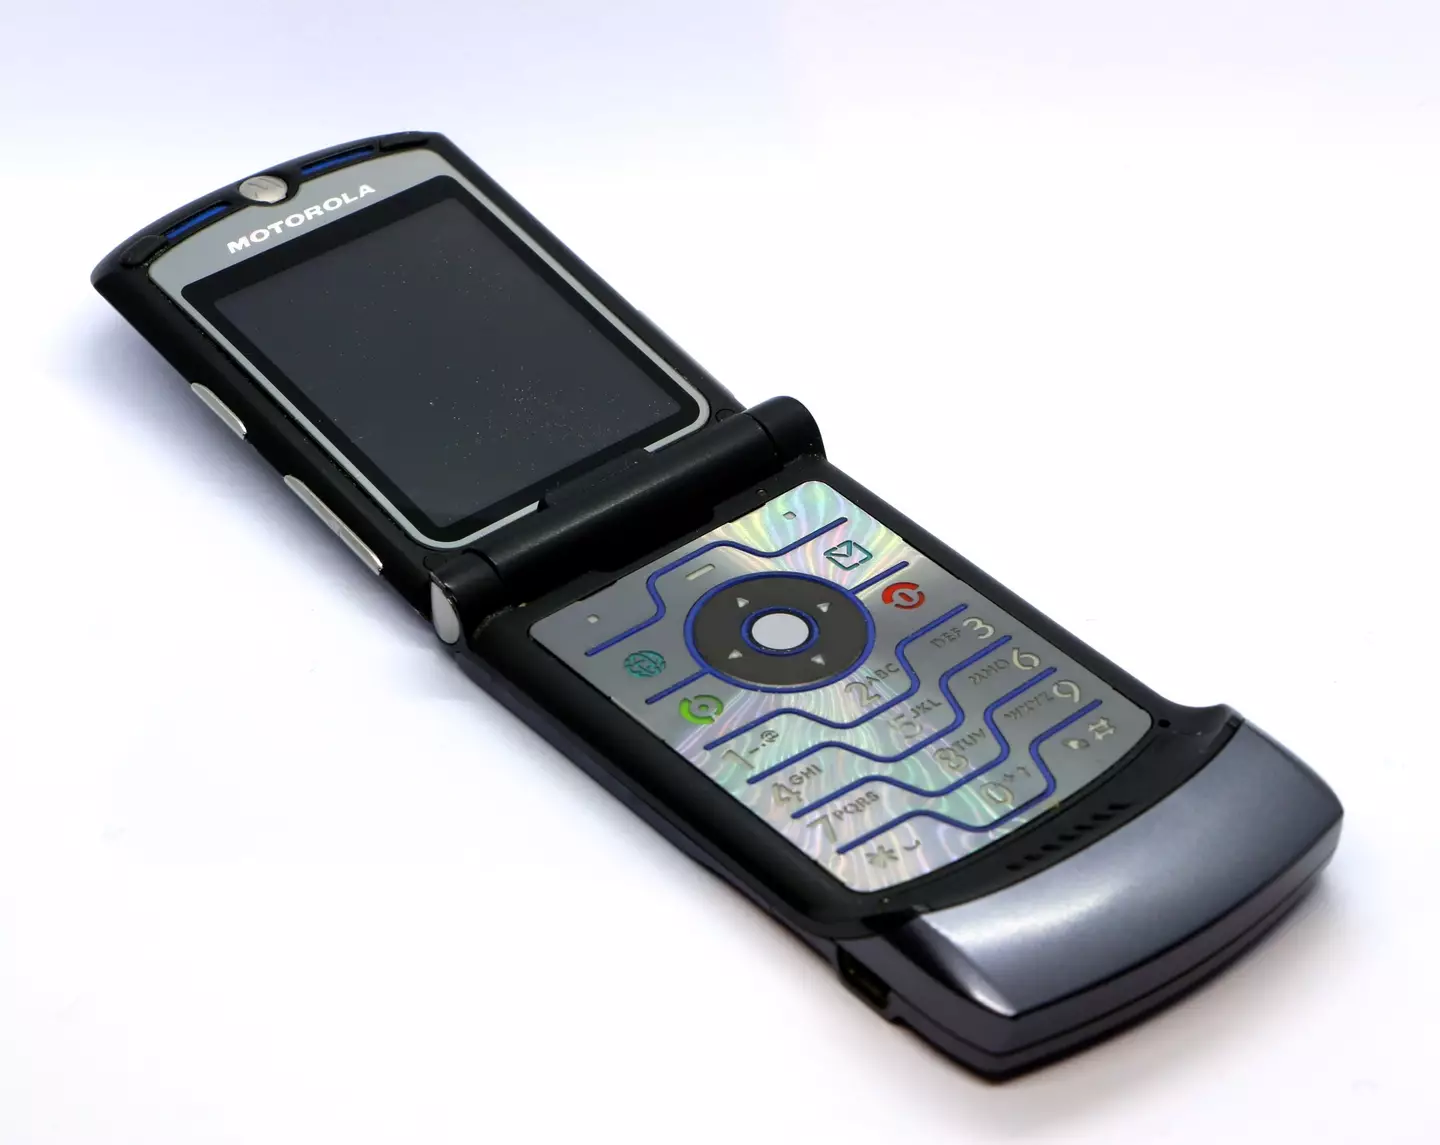 The original Motorola Razr was the coolest phone in the world for a good few years.